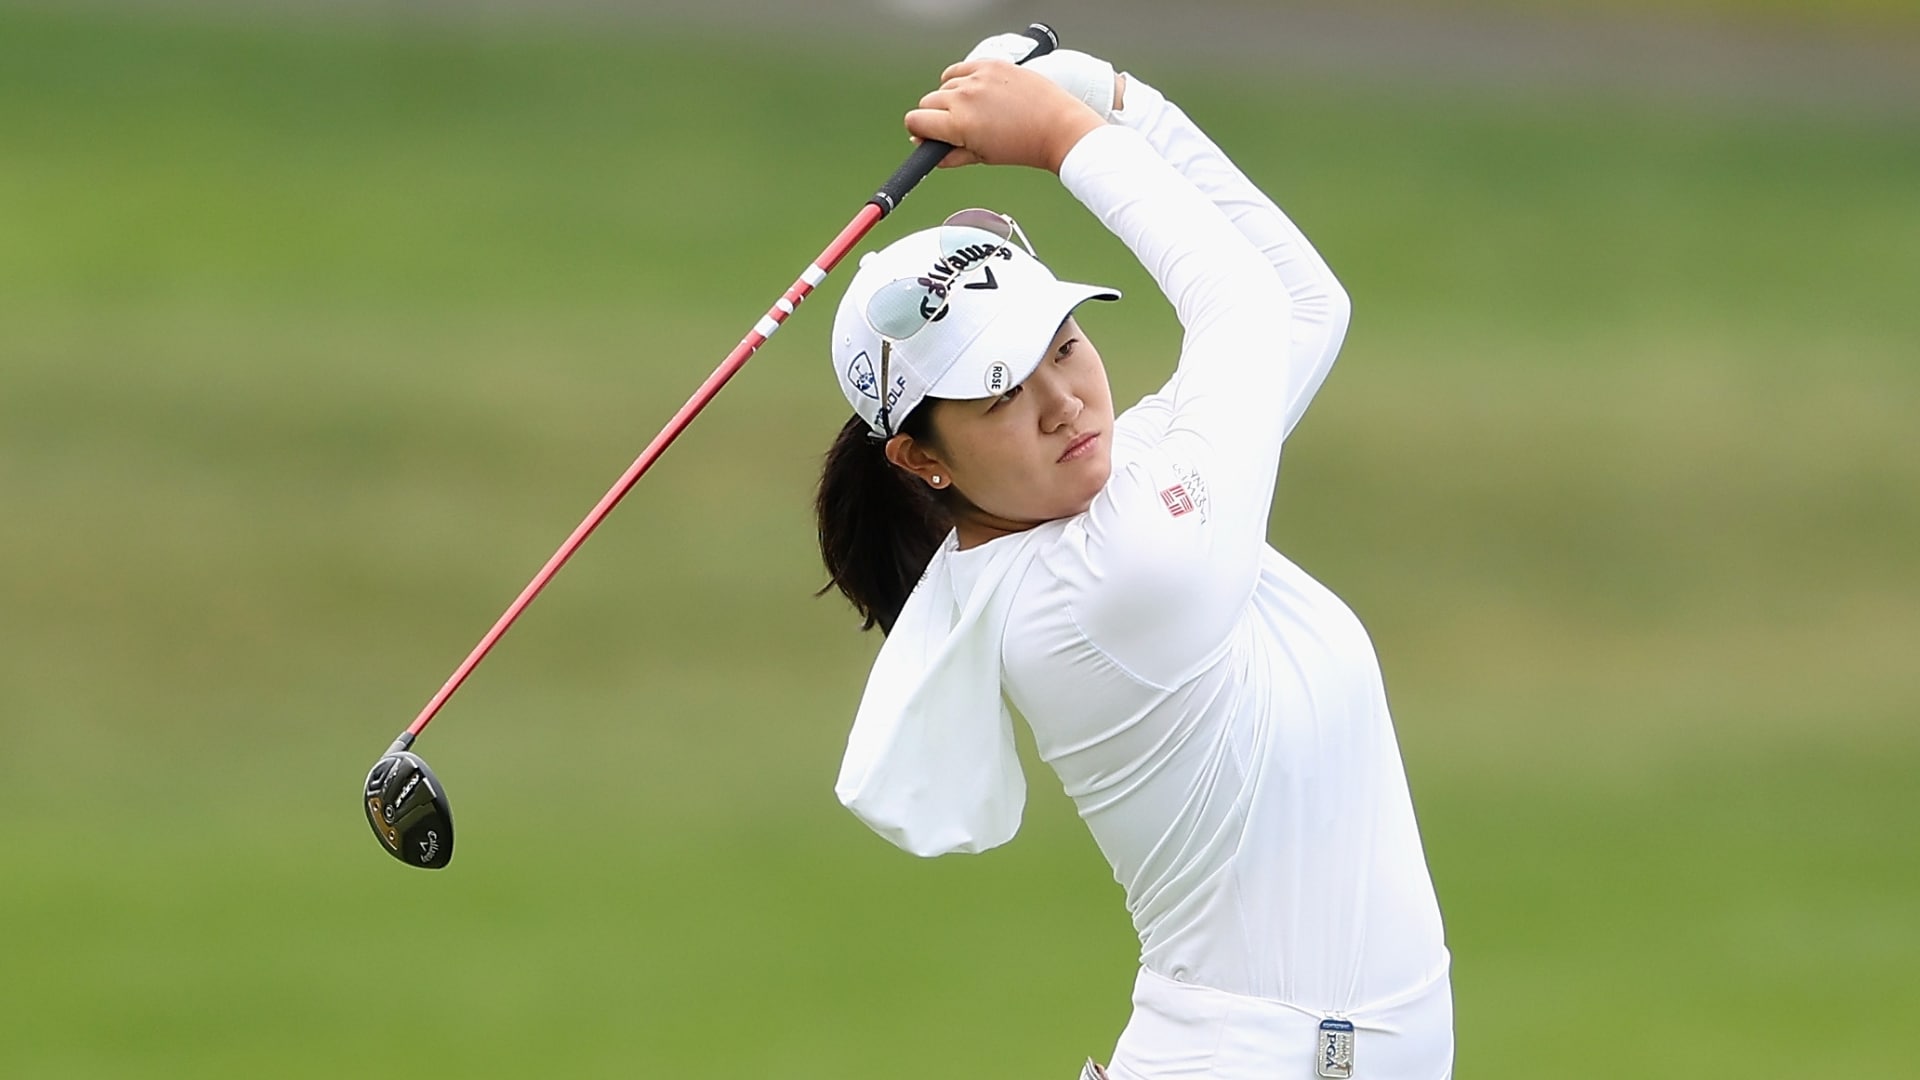 Adjusting to her new normal: Rose Zhang trying to stay grounded in first major as a pro